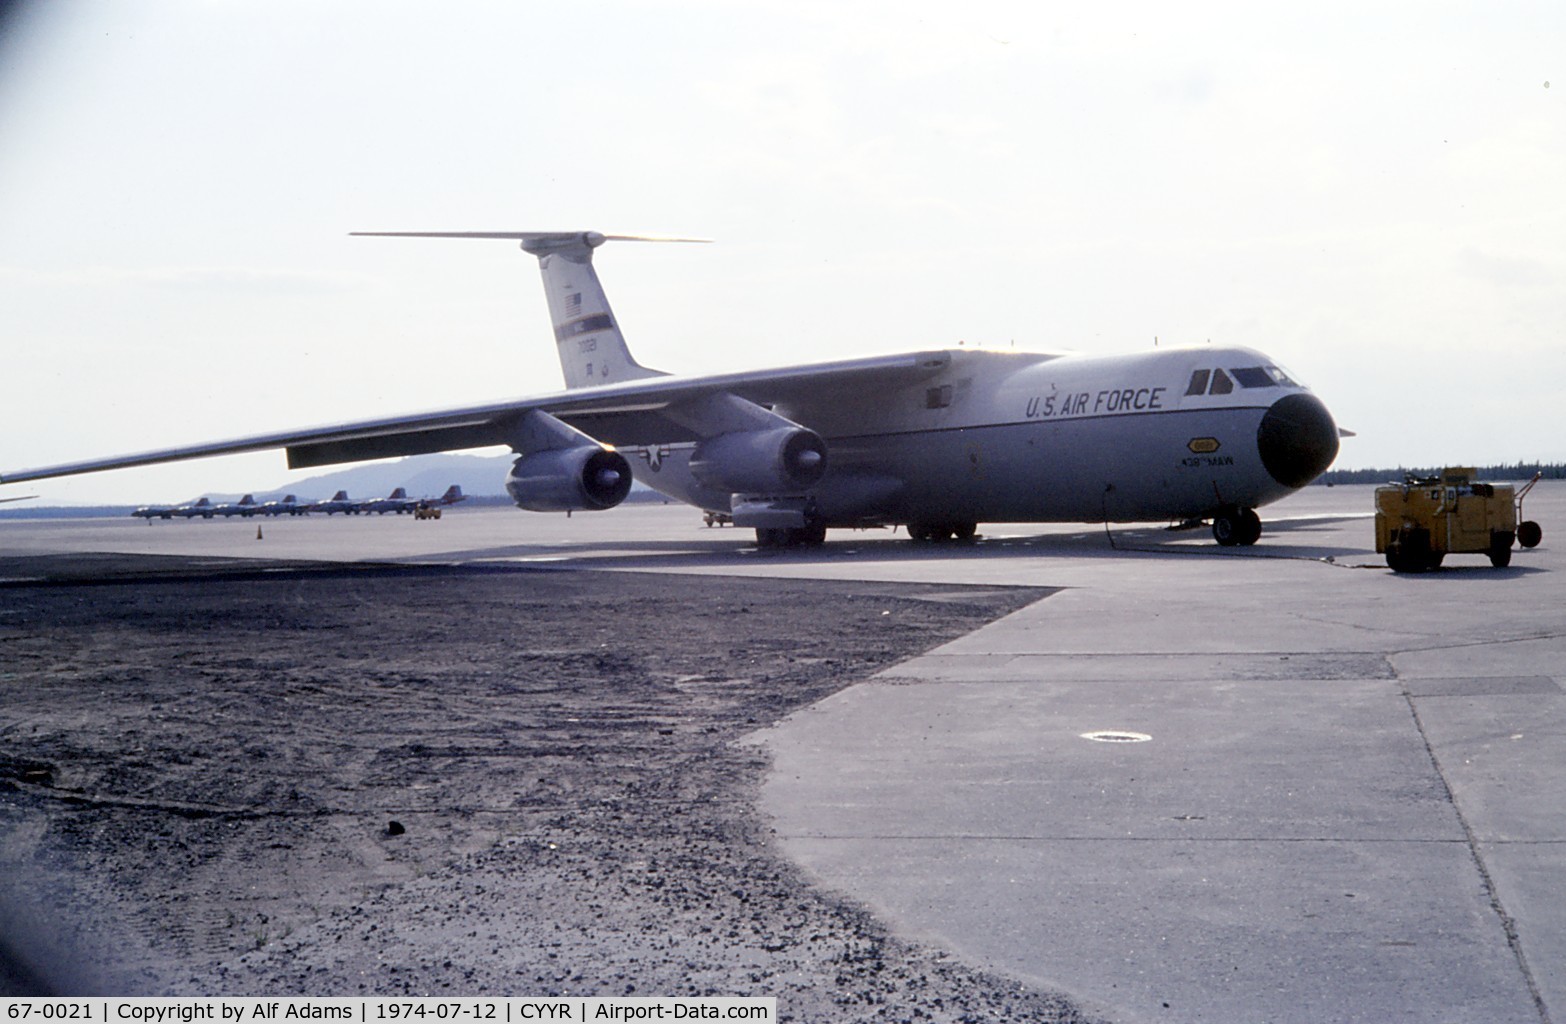 67-0021, 1967 Lockheed C-141B Starlifter C/N 300-6272, At Canadian Force Station, Goose Bay, Labrador in 1974.